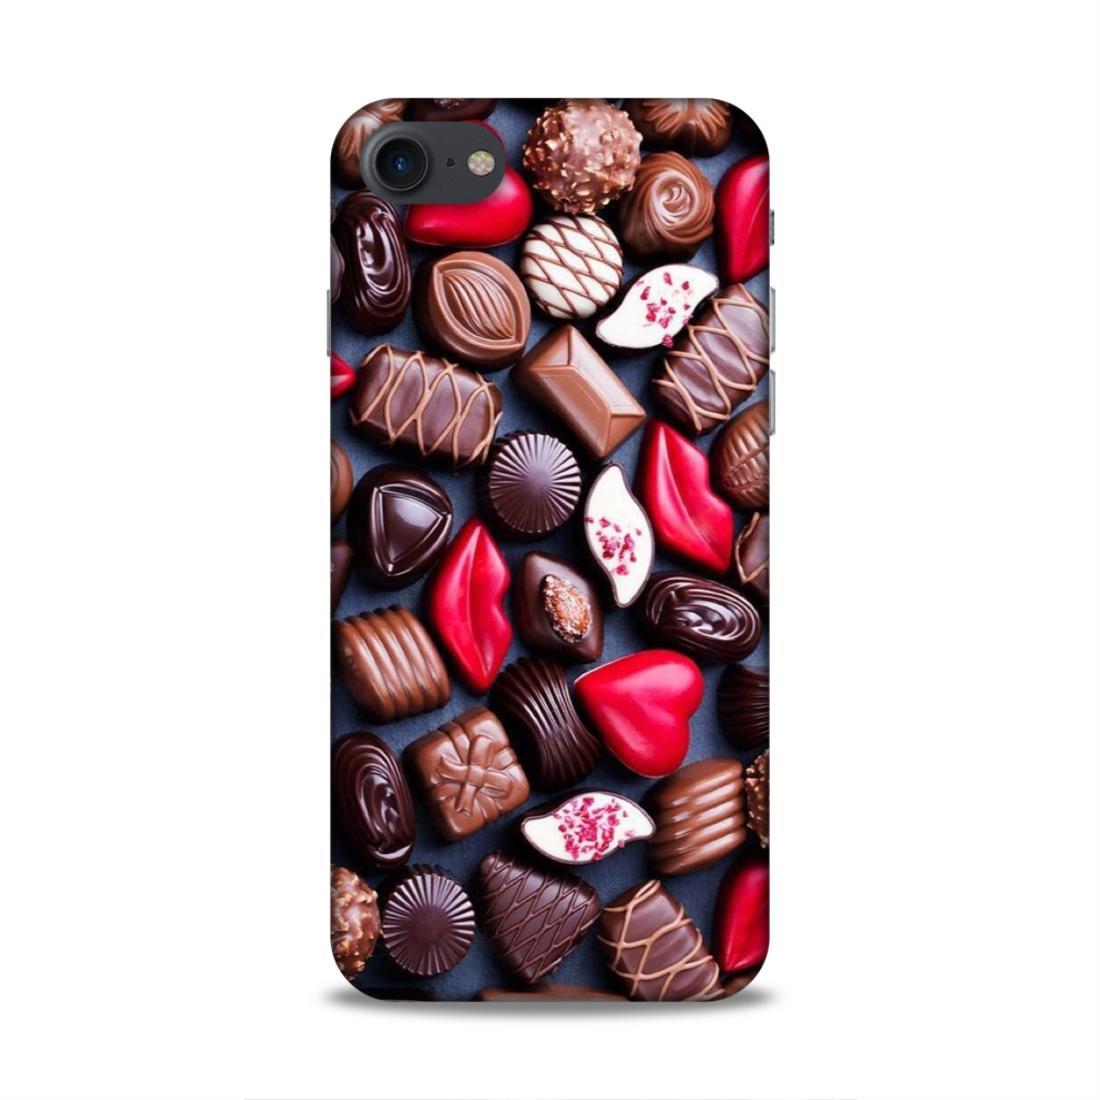 Chocolate Heart iPhone 8 Phone Case Cover